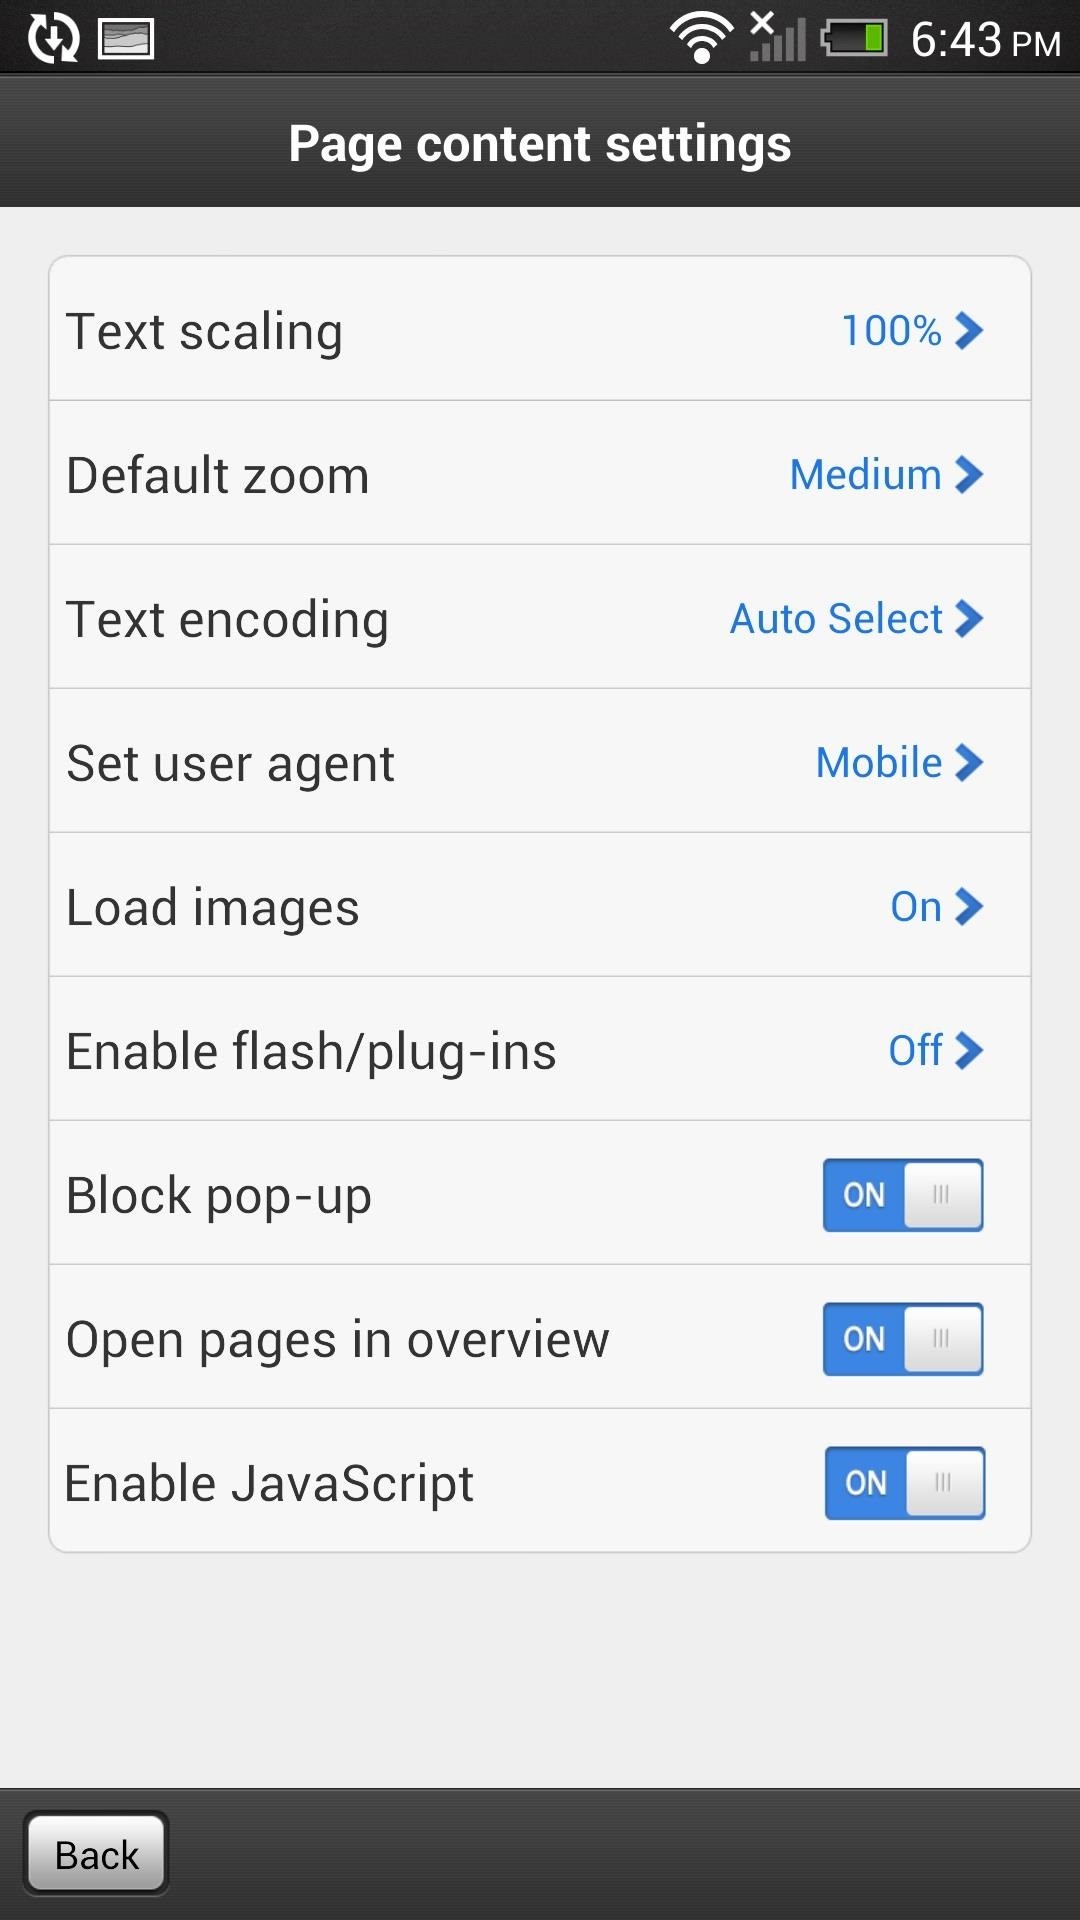 How to Install Adobe Flash Player on Your HTC One to Play Flash Games, Stream Amazon Instant Videos, & More